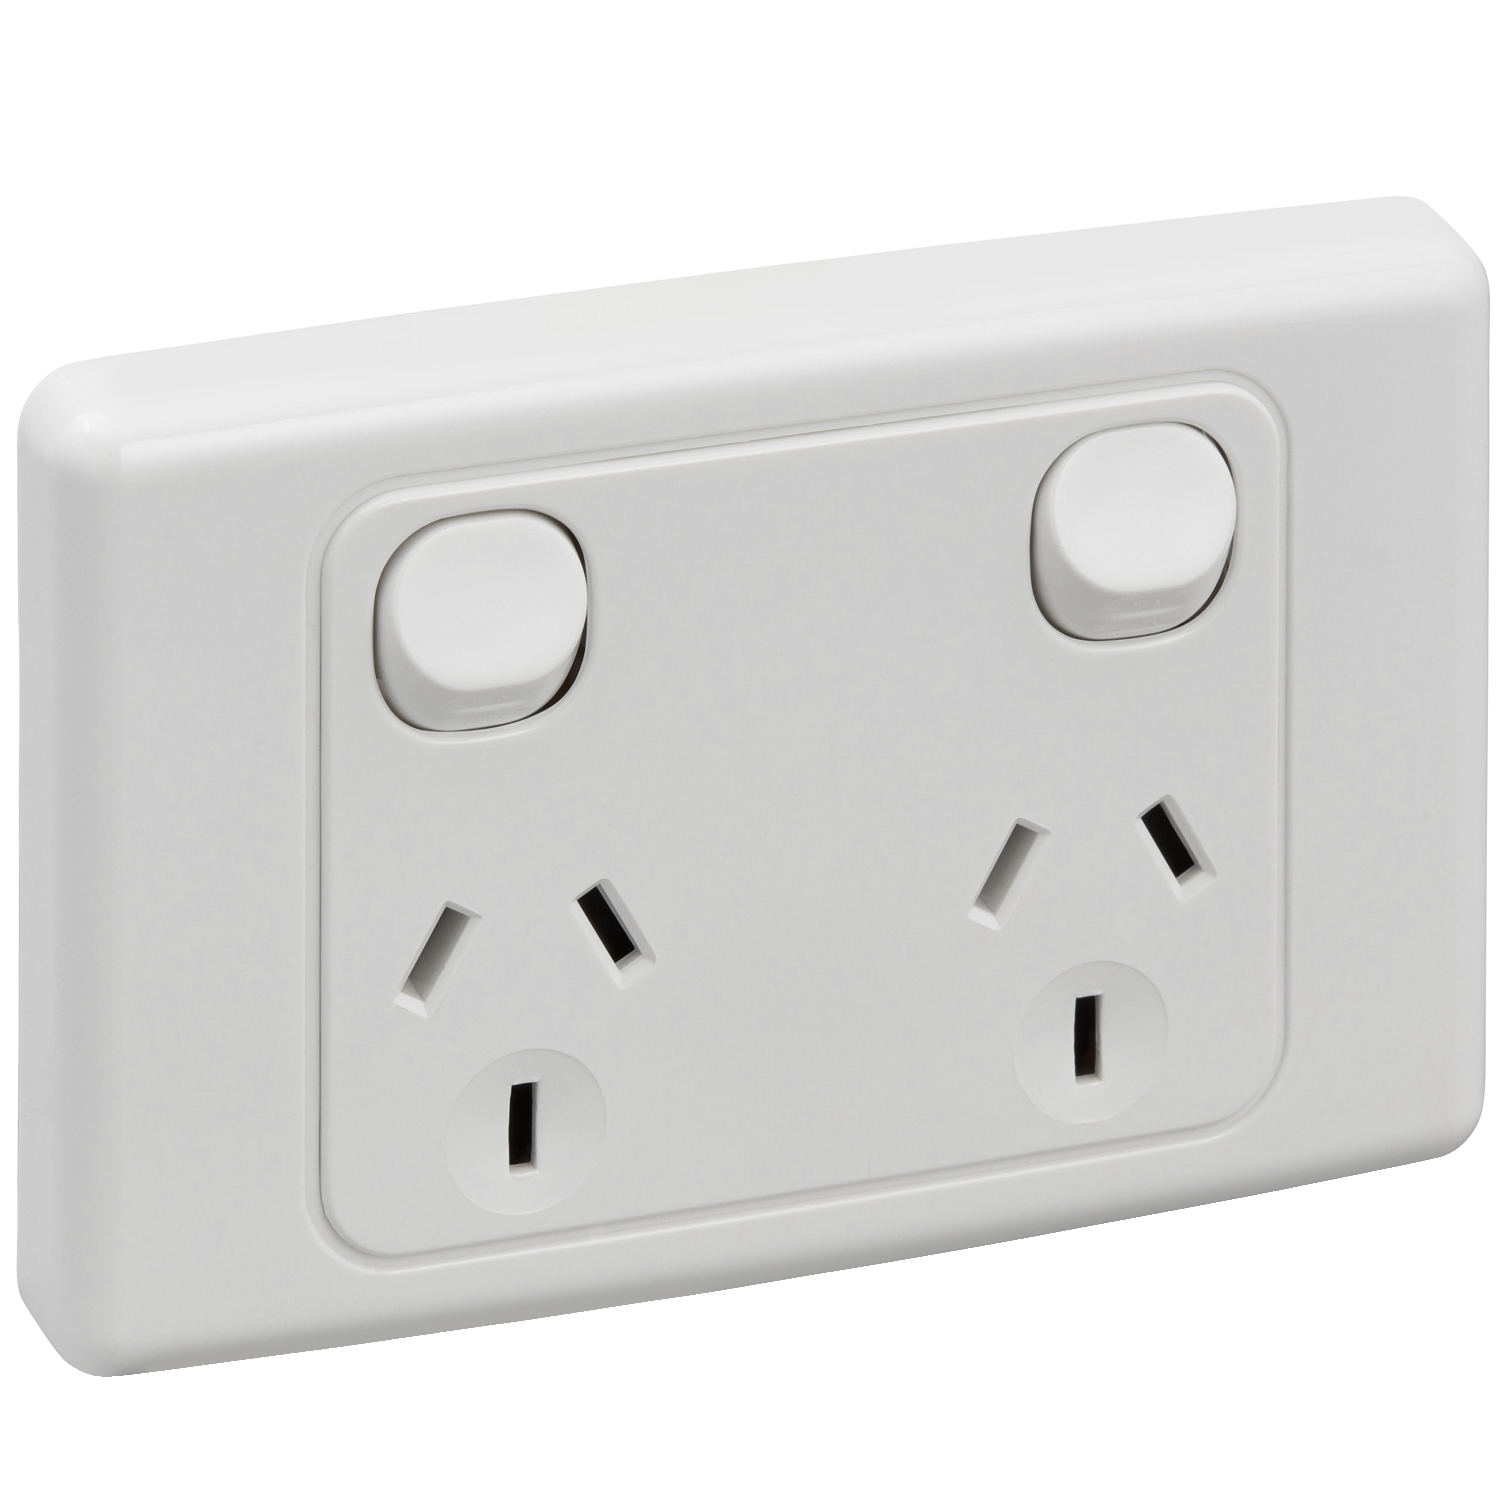 Socket Outlets Double Switch Horizontal, 250V, 10A, Shutters